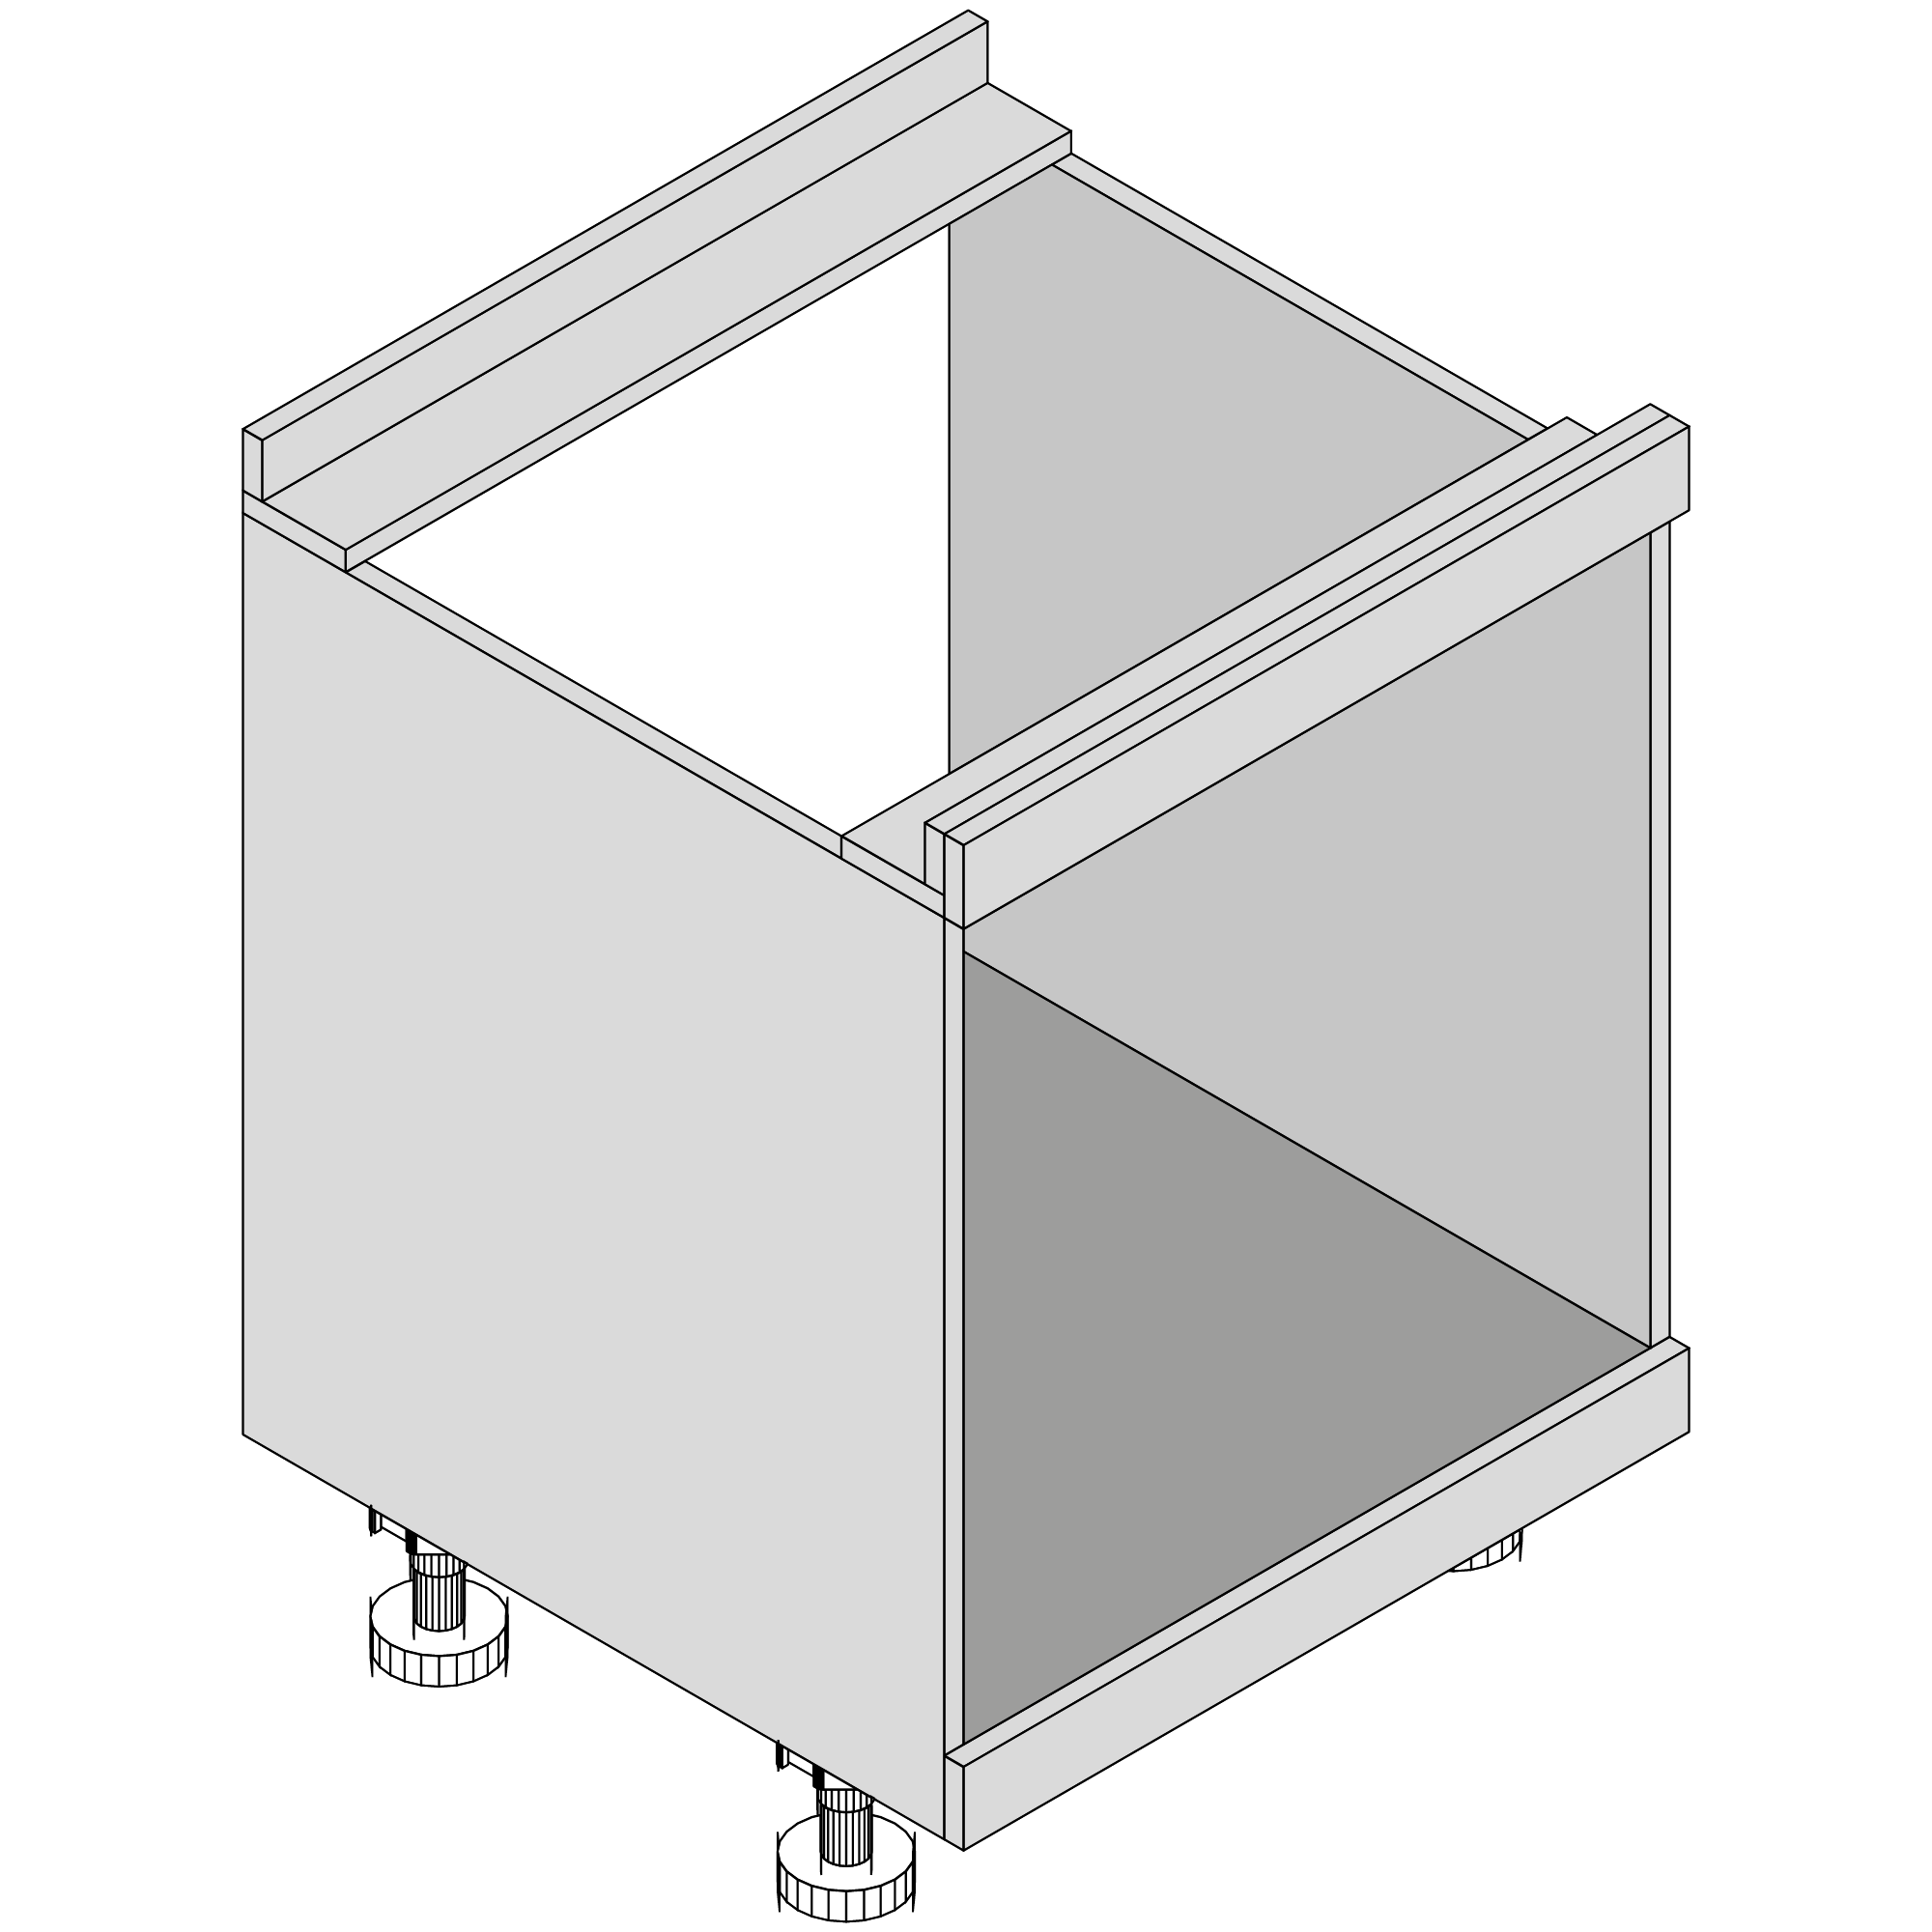 Diagram of a base under bench oven cabinet